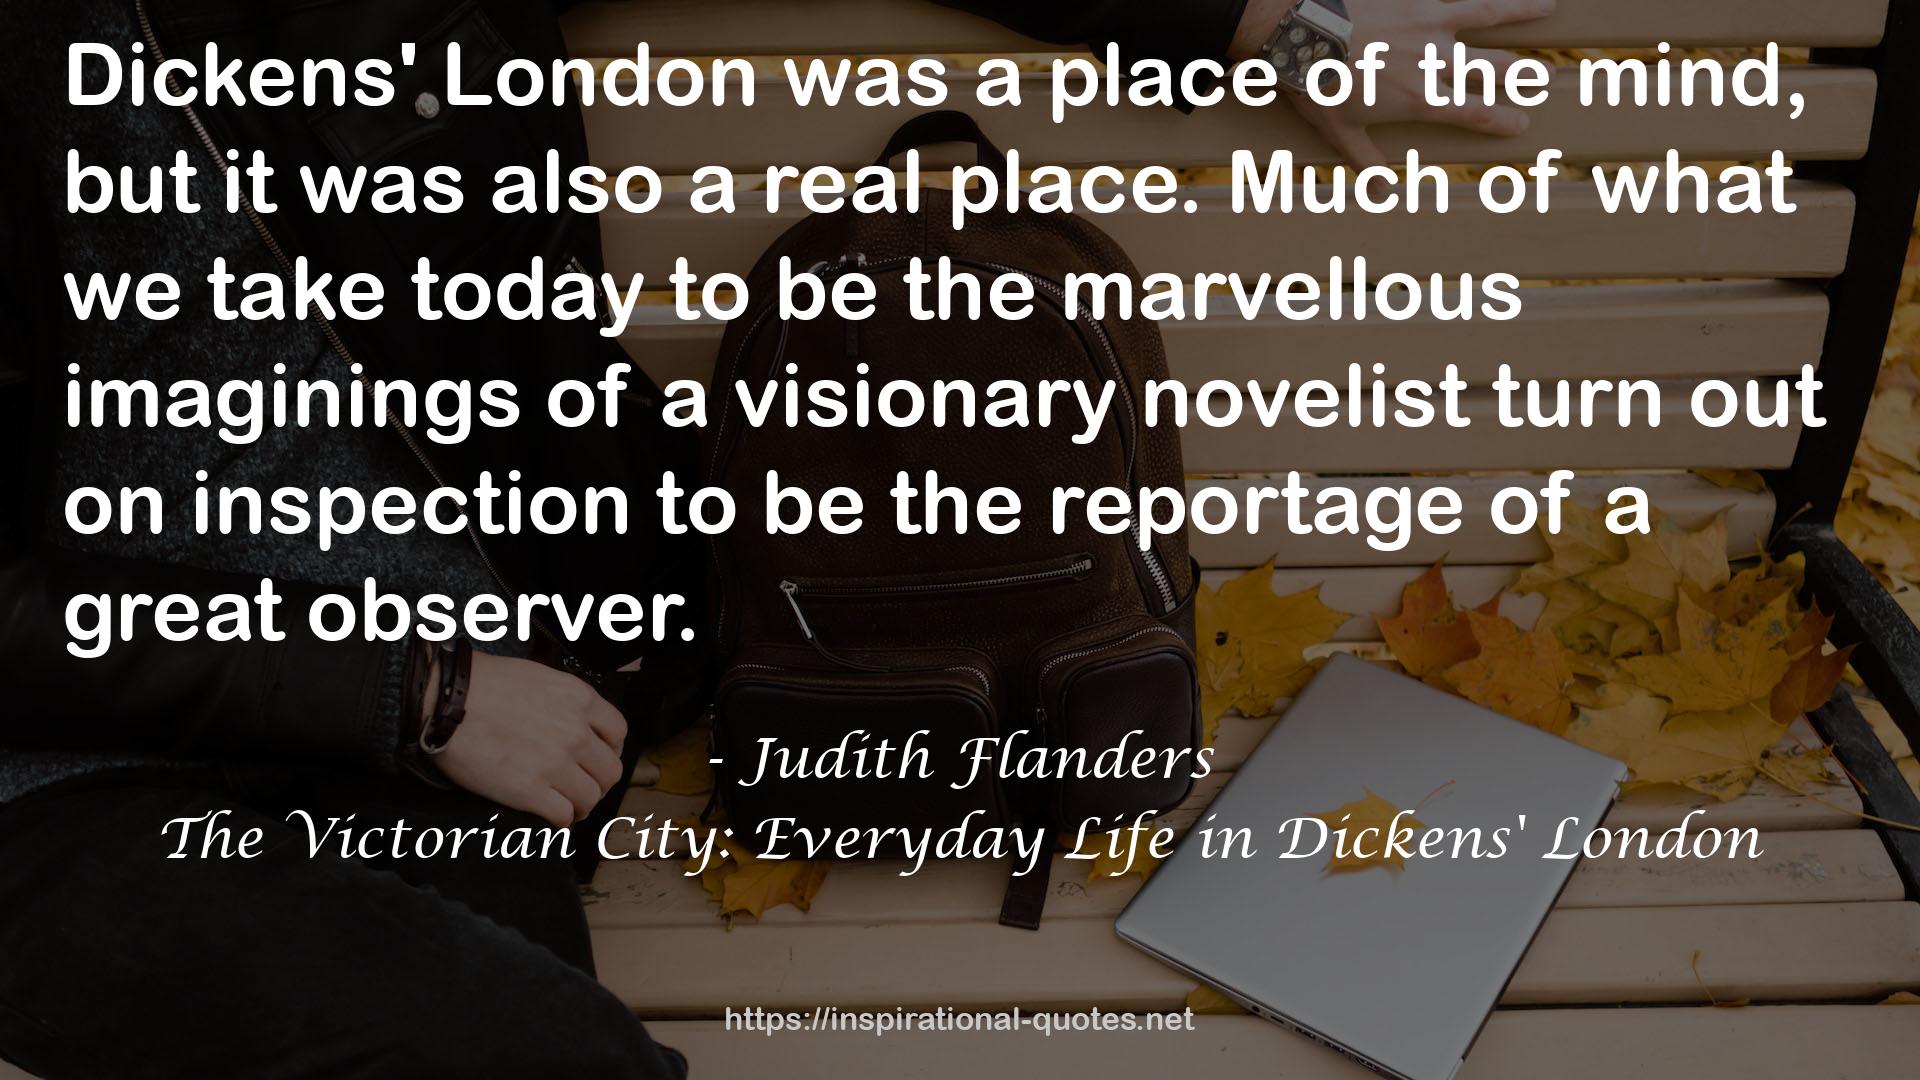 The Victorian City: Everyday Life in Dickens' London QUOTES